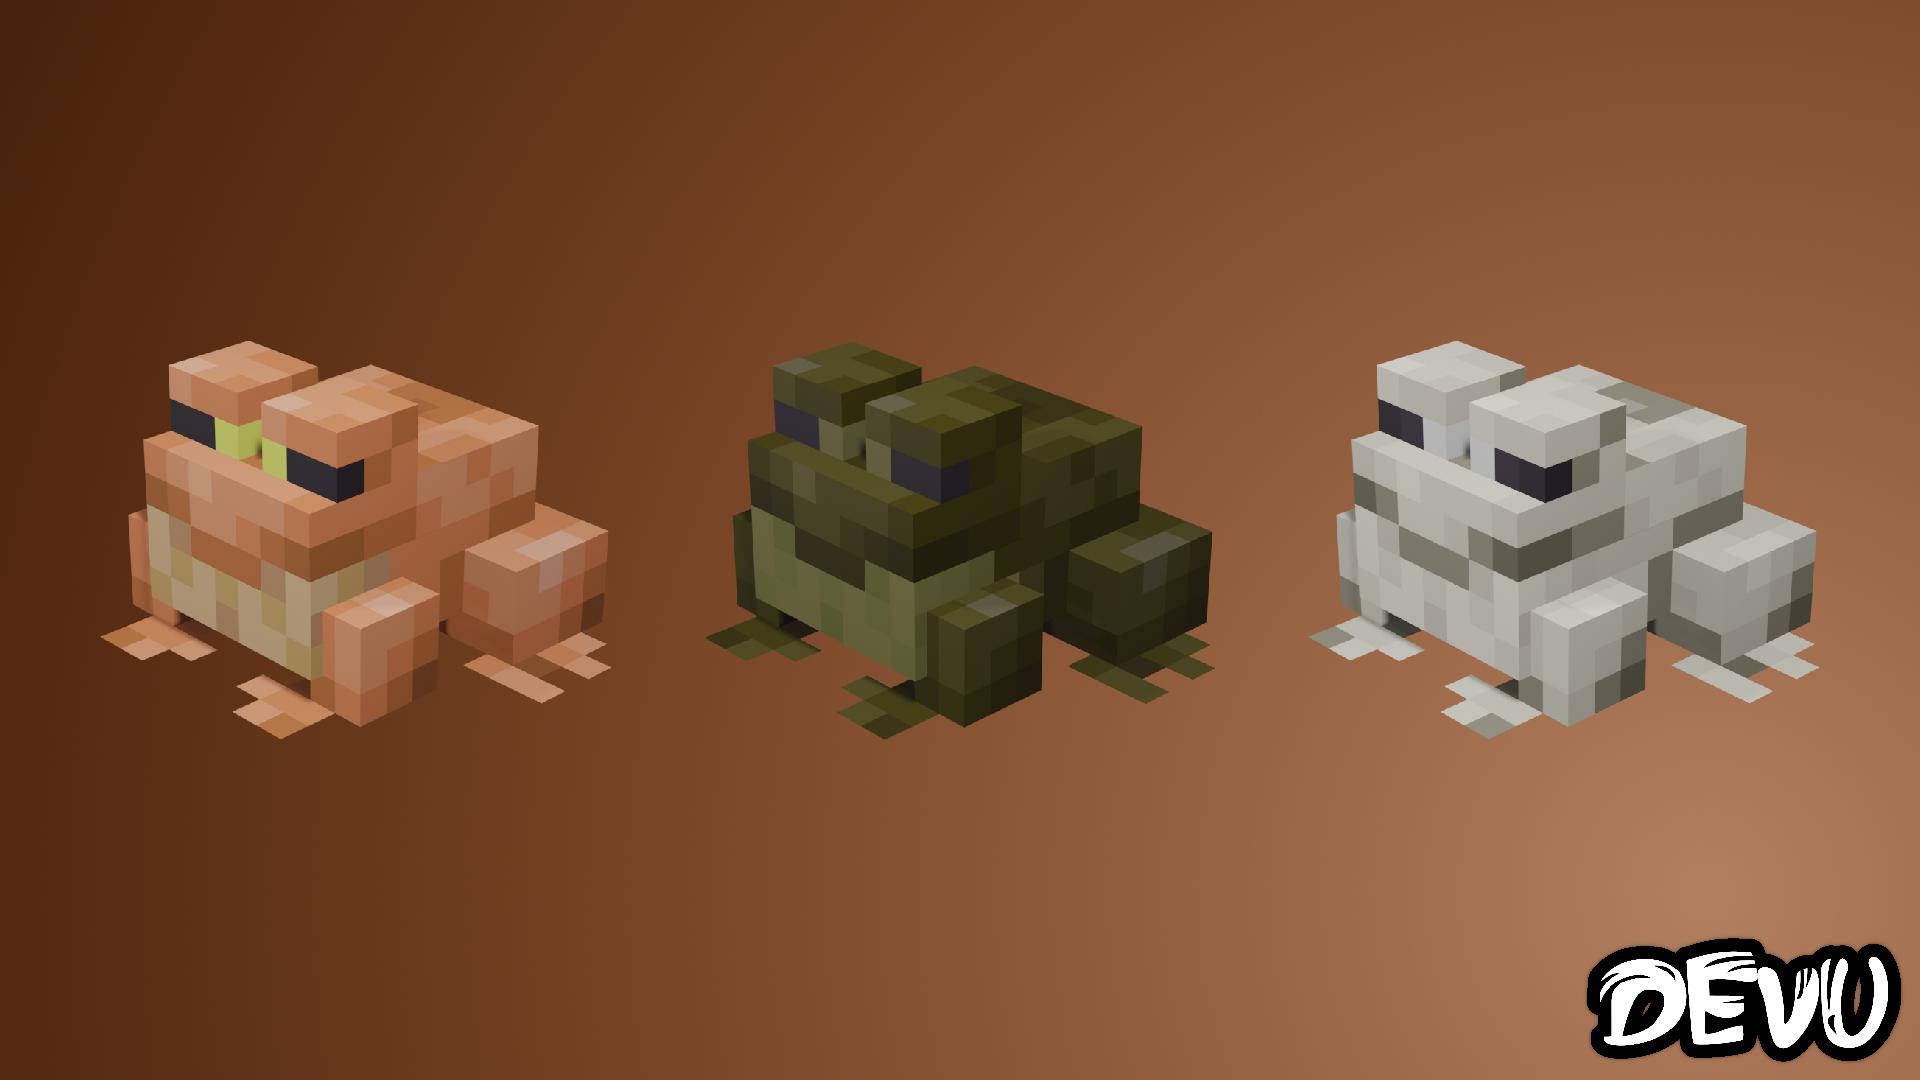 I recreated 1.19 Frogs and put them in some situations